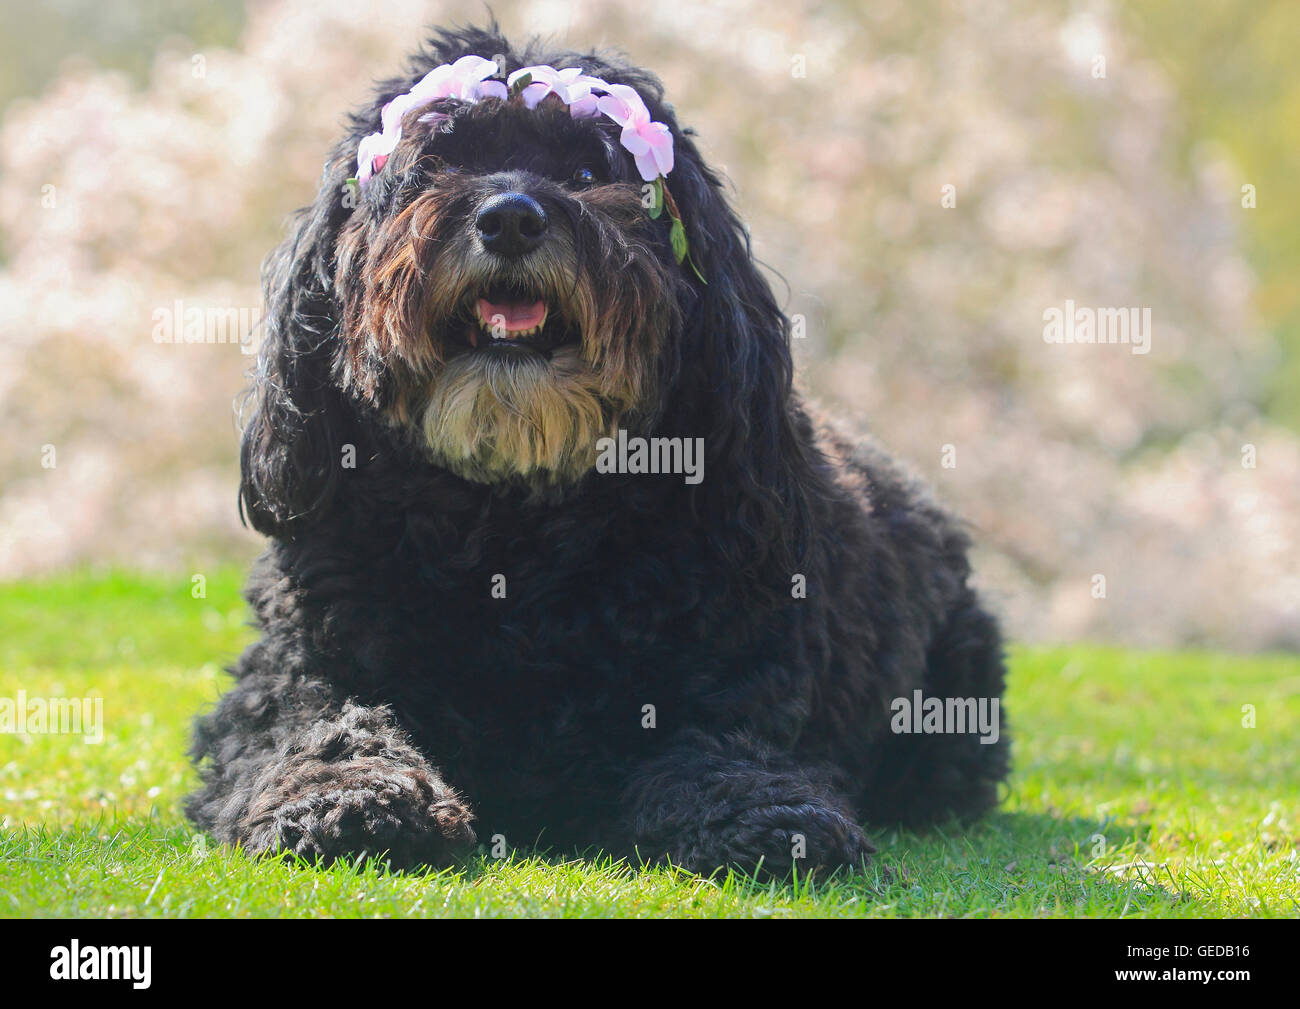 bouvier and poodle mix